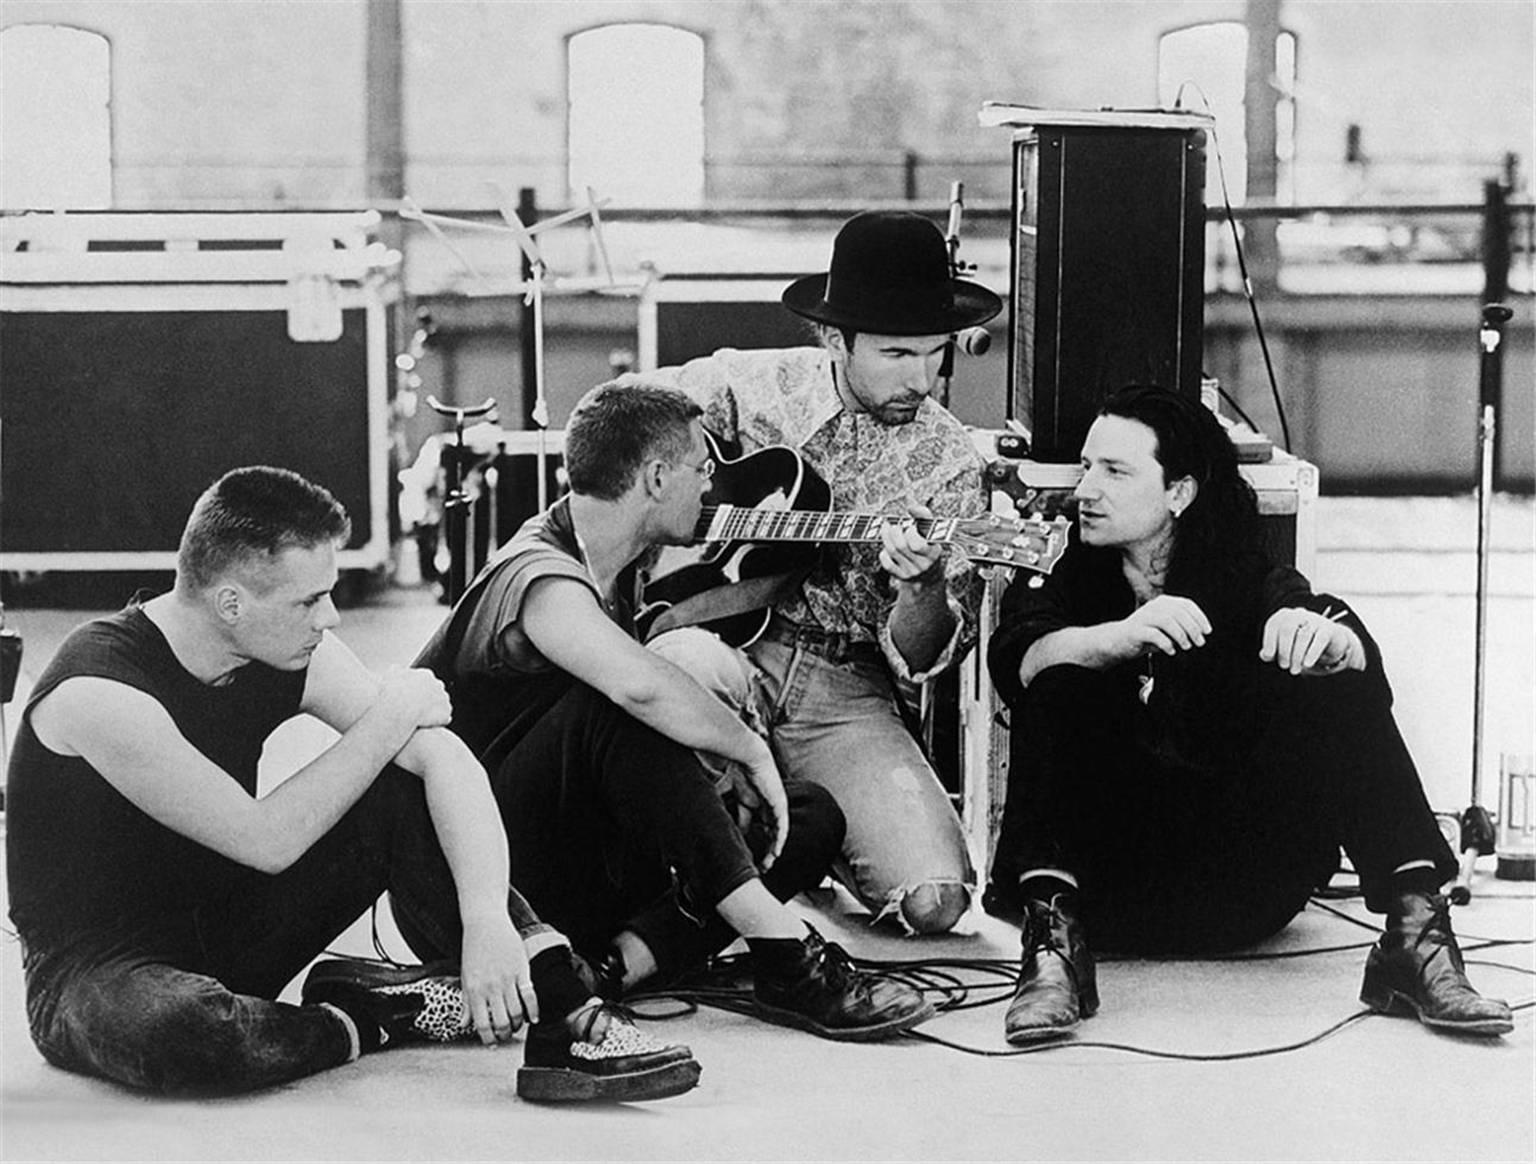 Colm Henry Black and White Photograph - U2 recording Rattle and Hum in Dublin